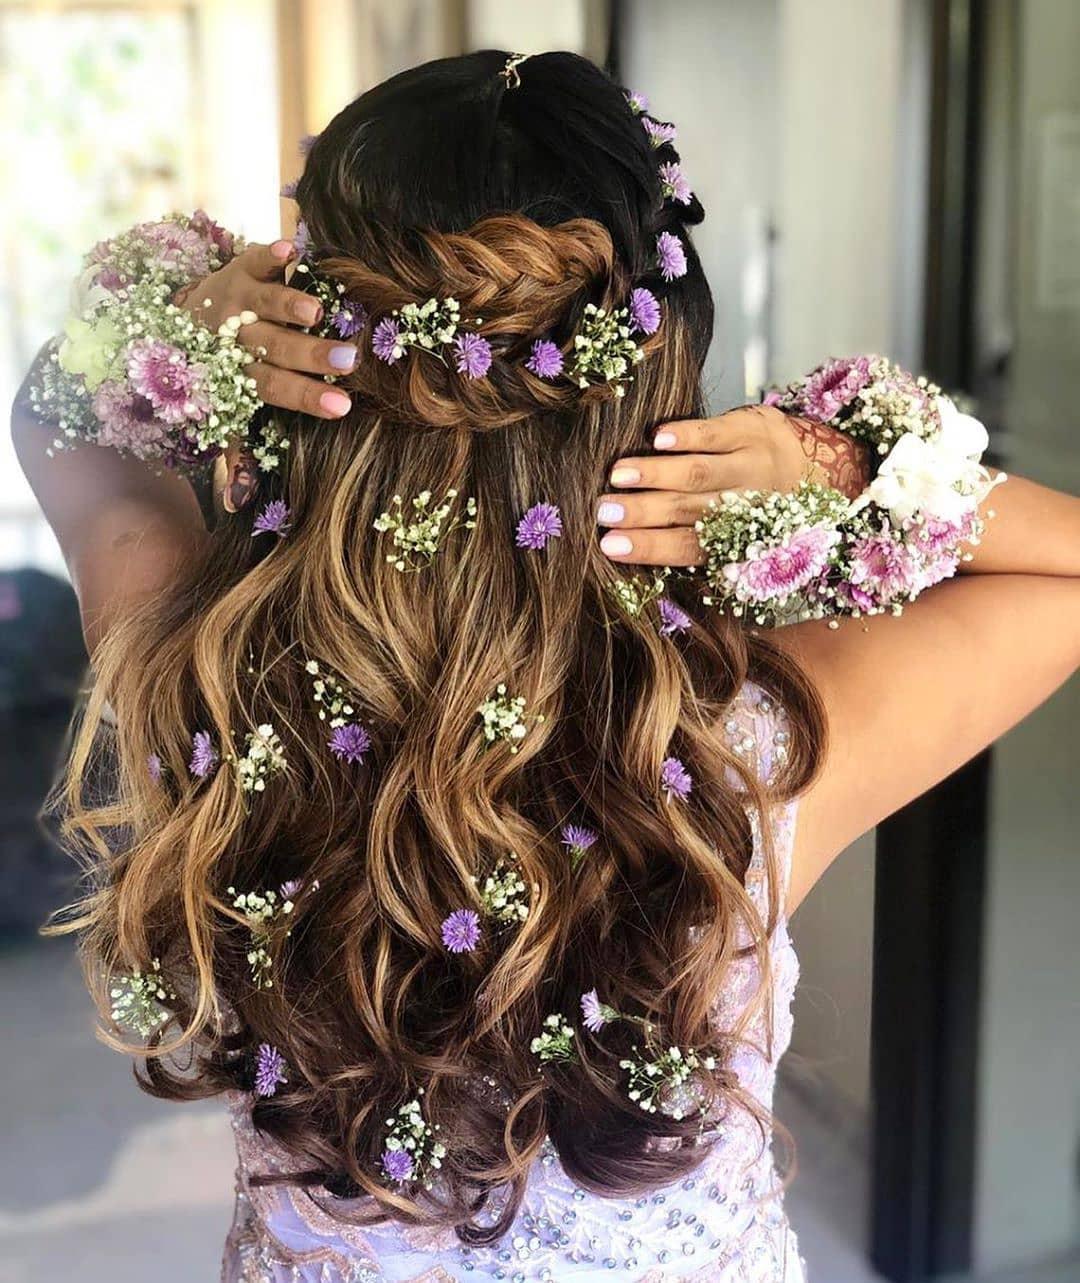 Flower Hairstyle On Your Mind? Tips For Wearing Fresh Blooms